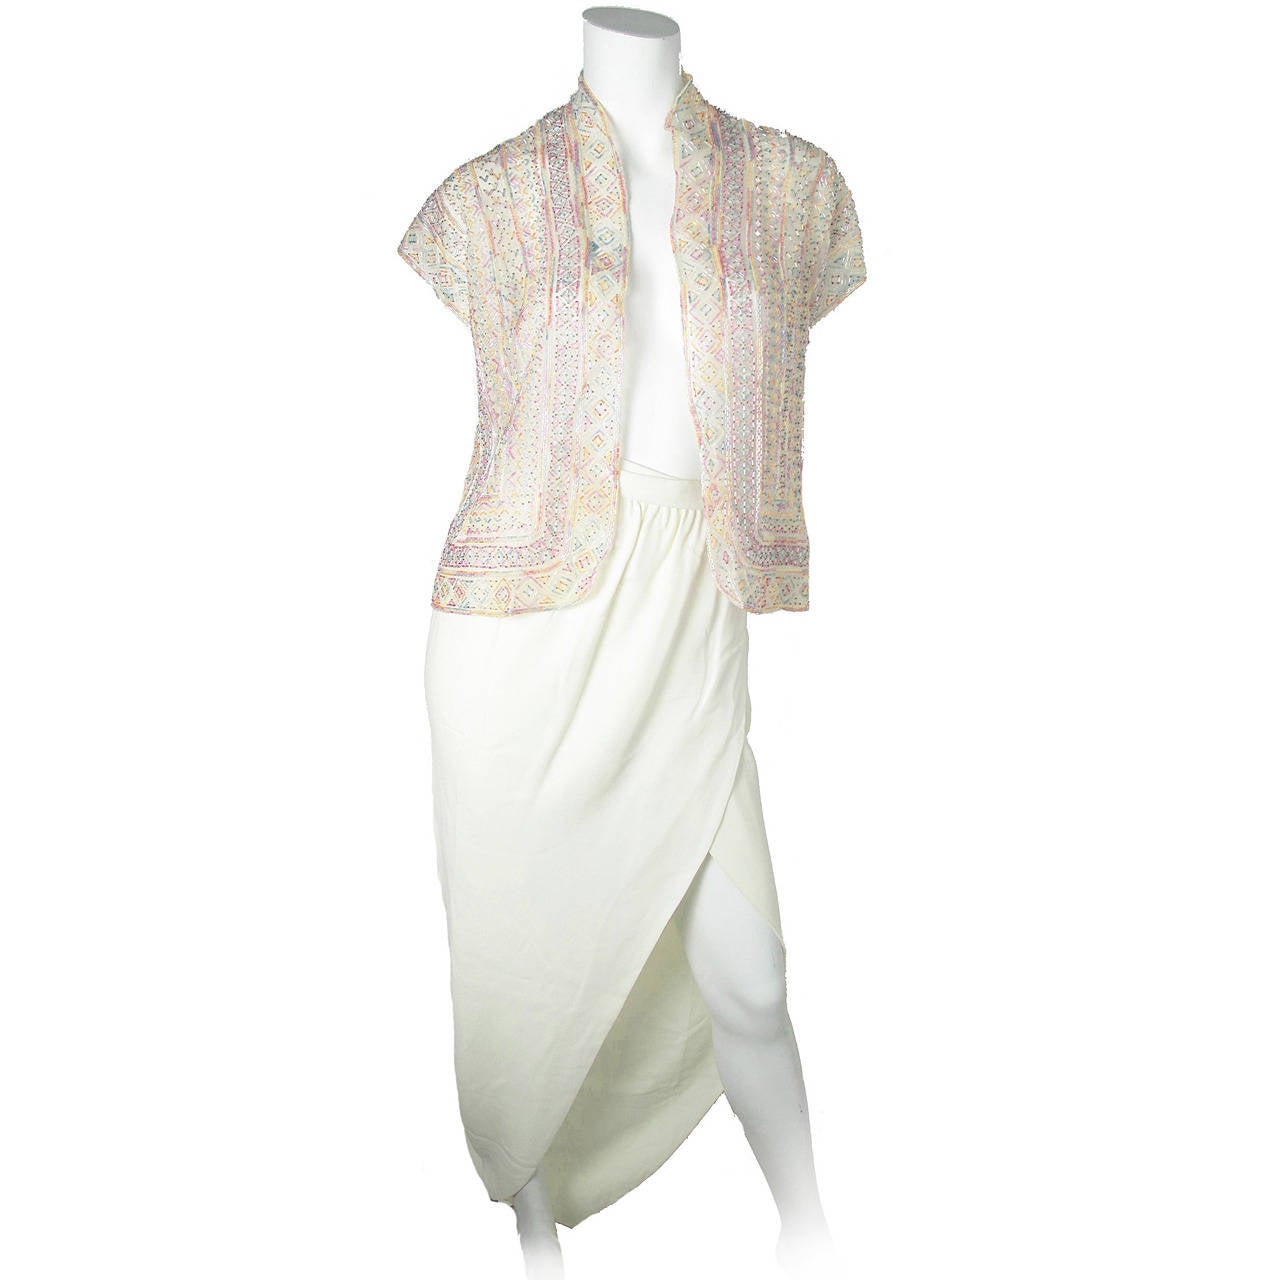 Late 70s - Early 80s Halston Sheer Beaded Jacket & Skirt with Side Slit